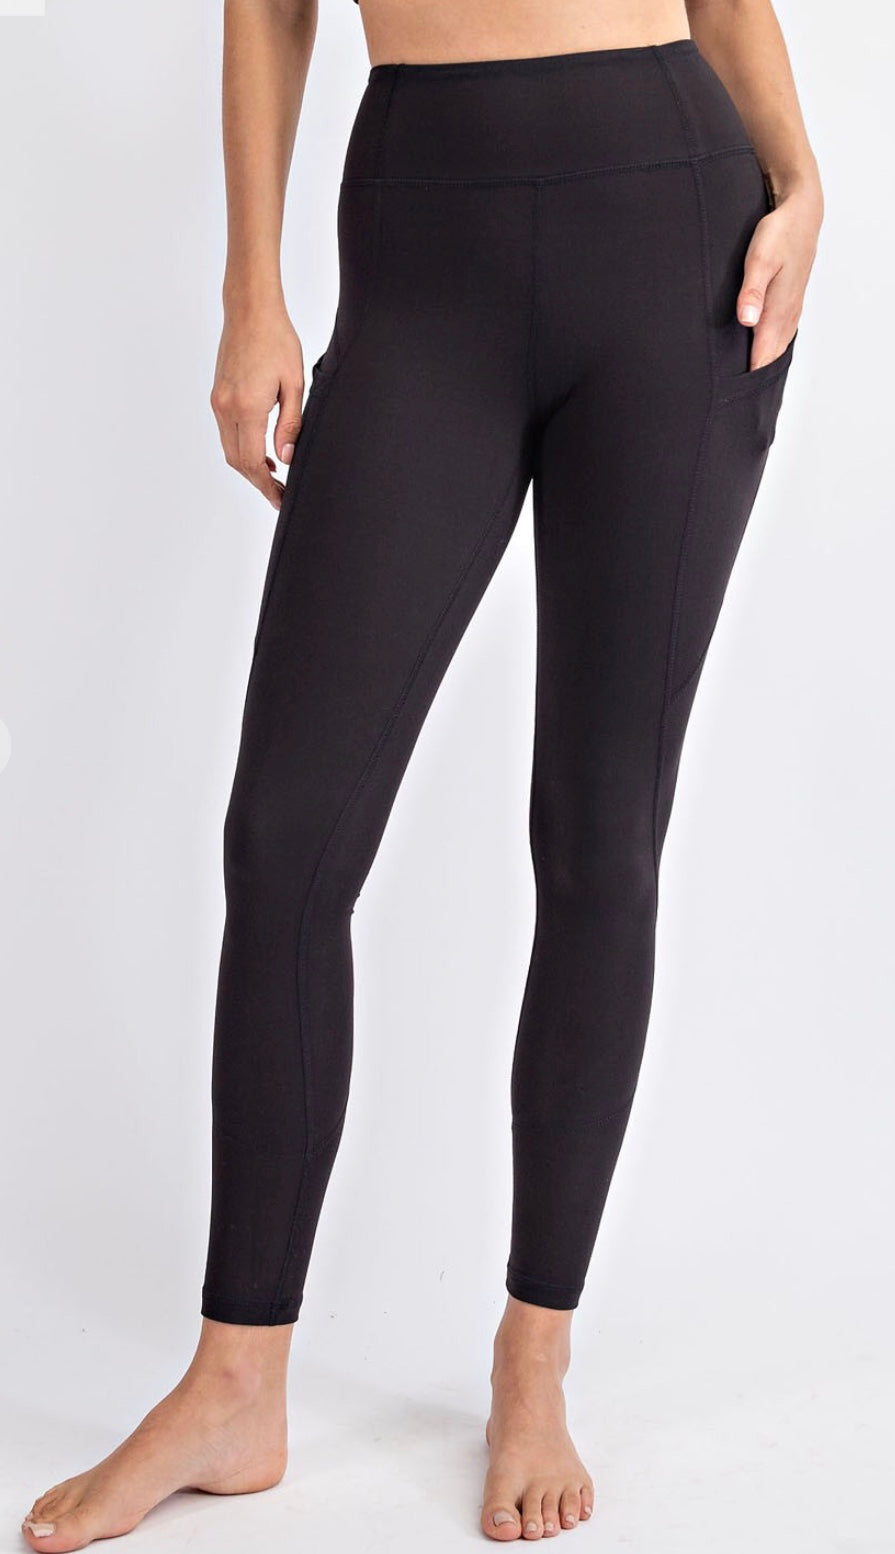 Rae Mode Plus Size V Waist Flared Yoga Pants – The Bee Chic Boutique